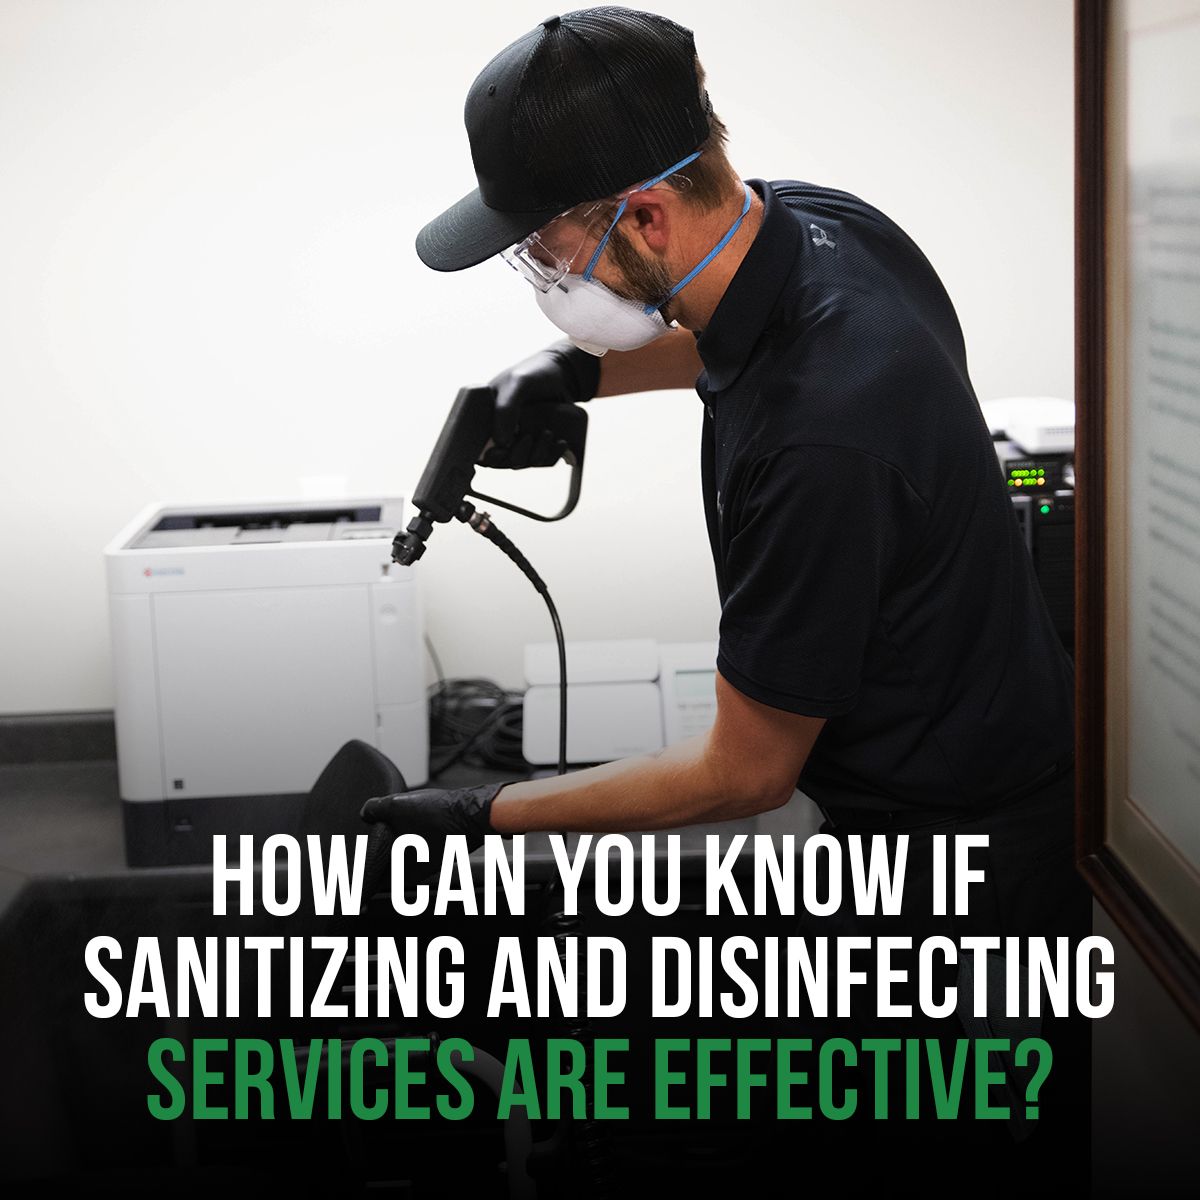 How Can You Know If Sanitizing and Disinfecting Services Are Effective?